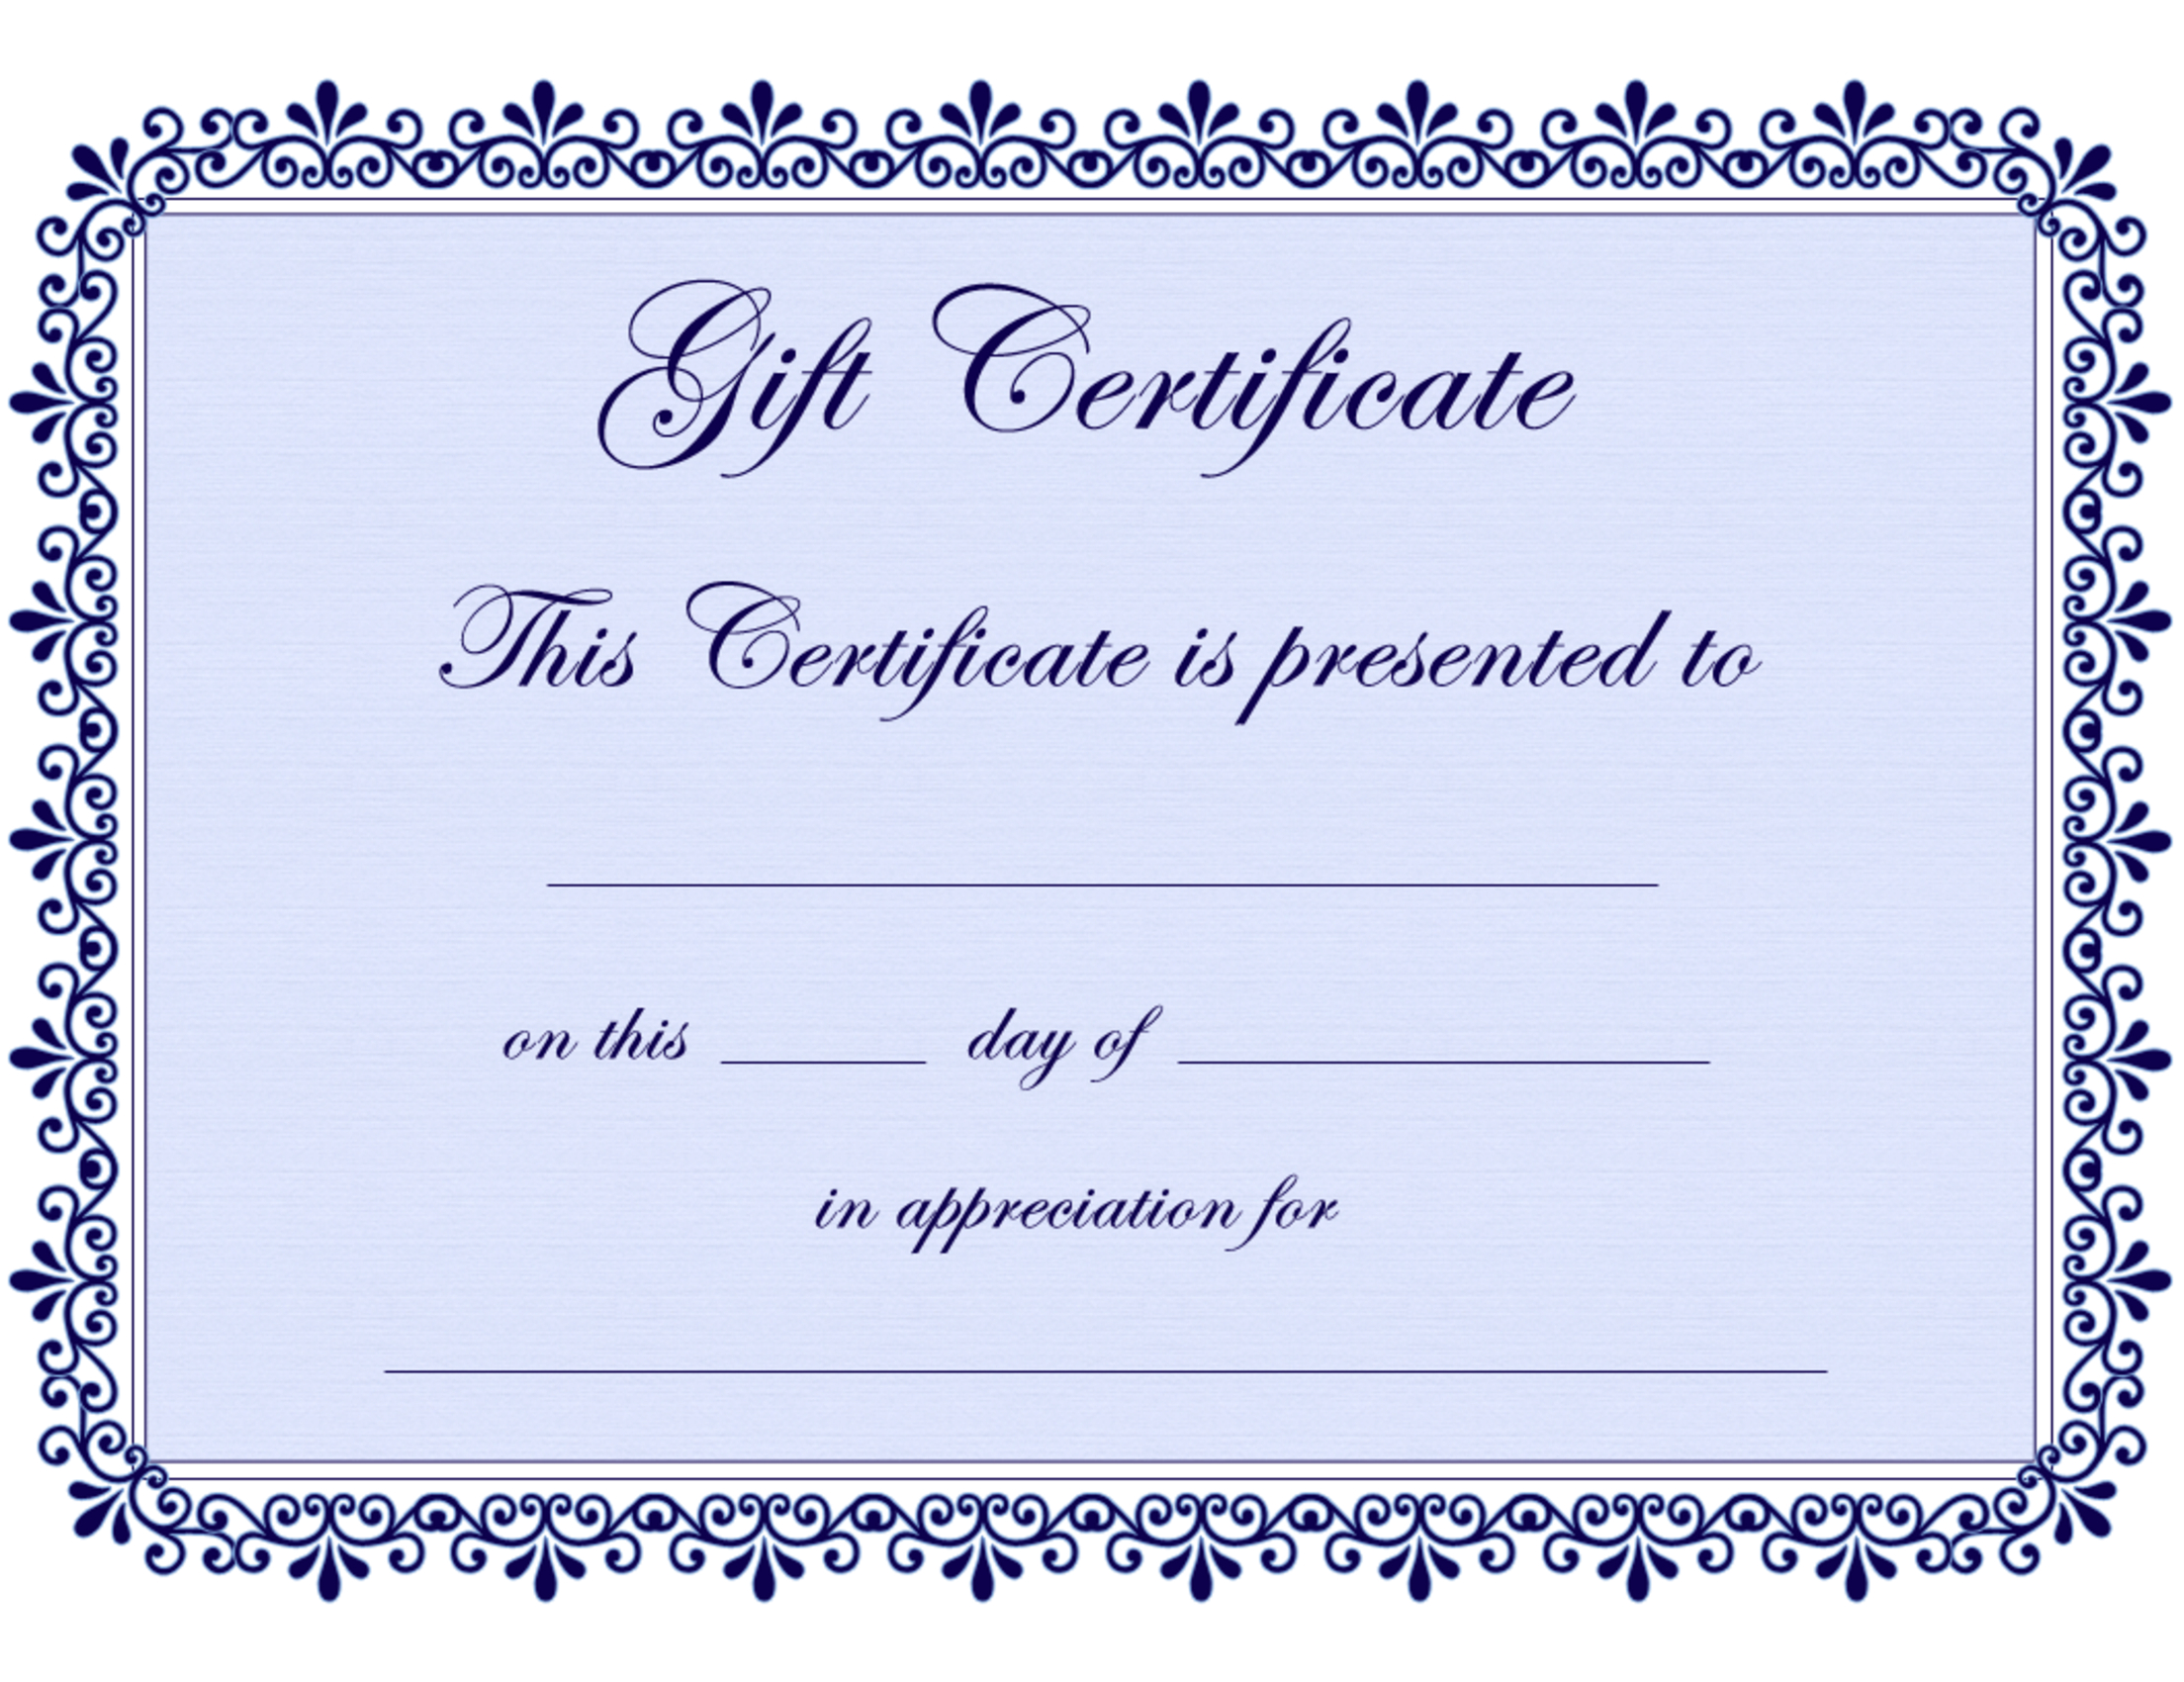 Certificate Templates | Gift Certificate Template Free - Pdf - Commitment Certificate Free Printable